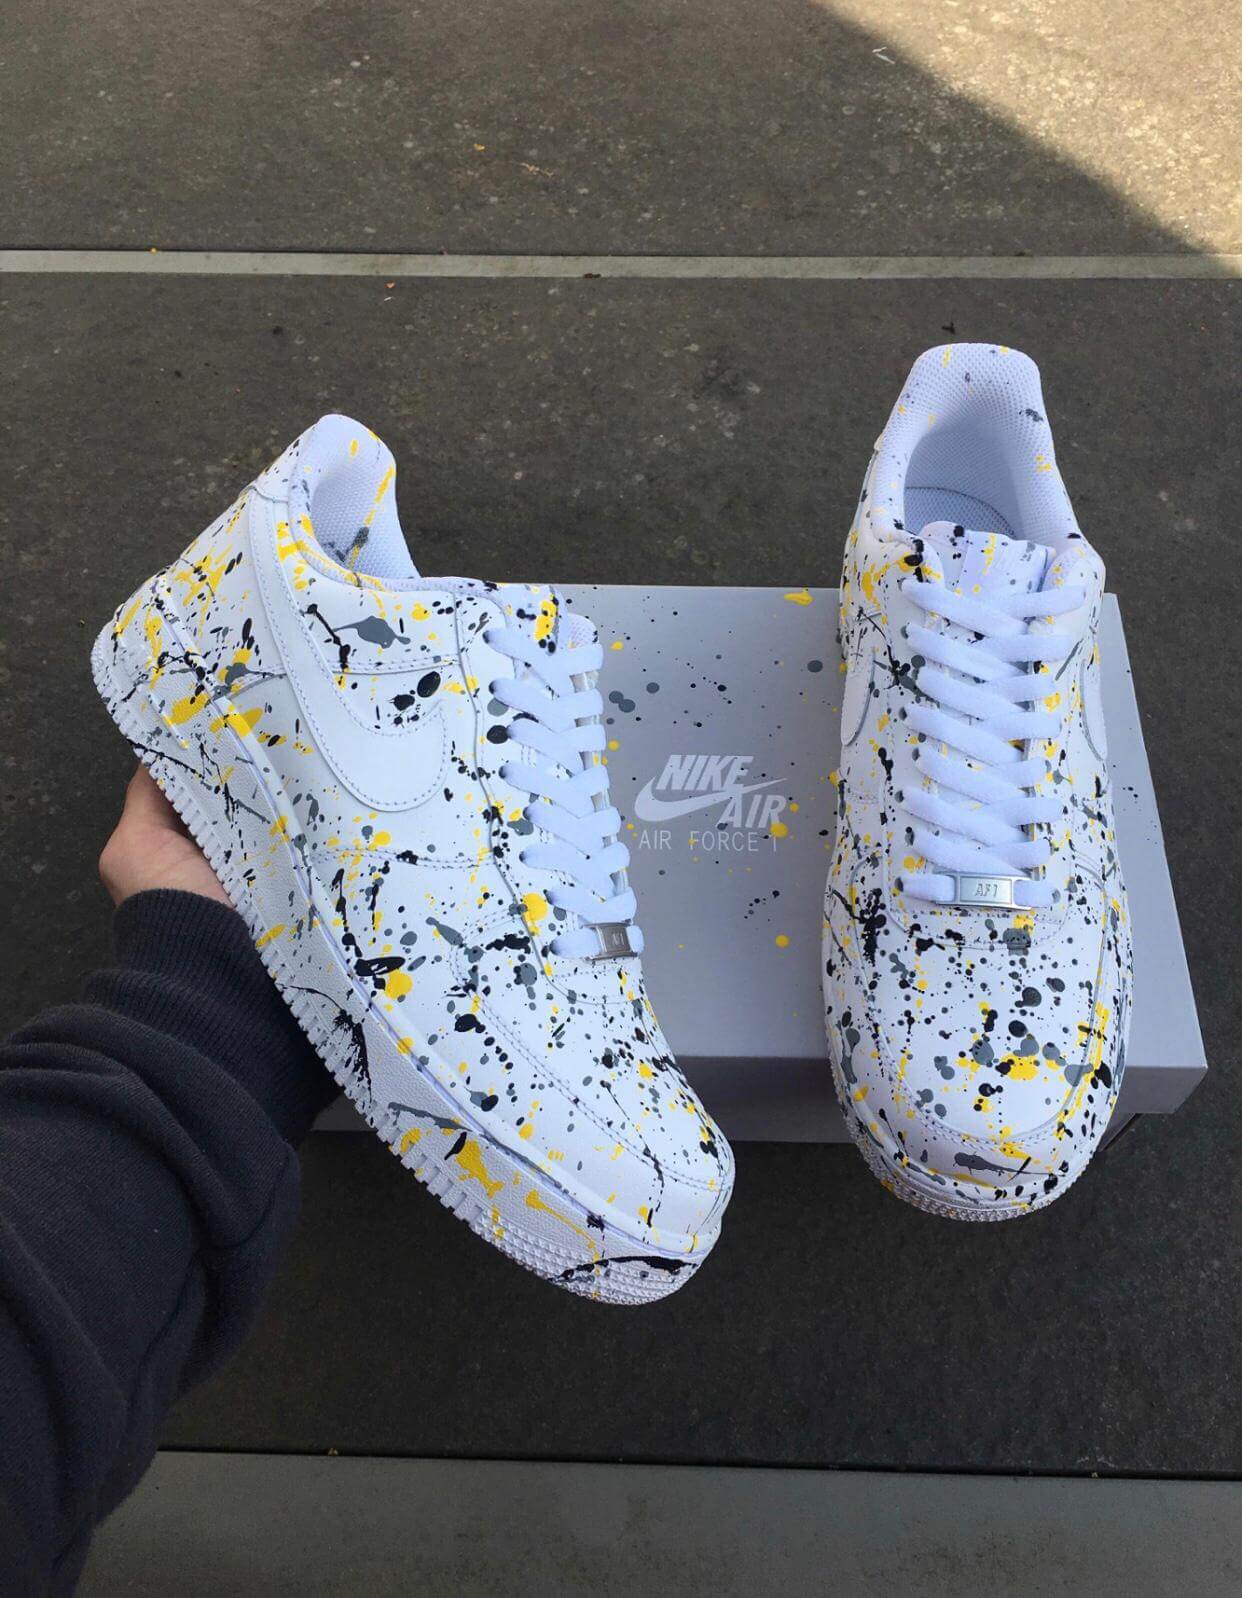 splattered paint on white leather nike air force 1, stylish,hype design great for nike fans,teenagers,adults and hypebeasts